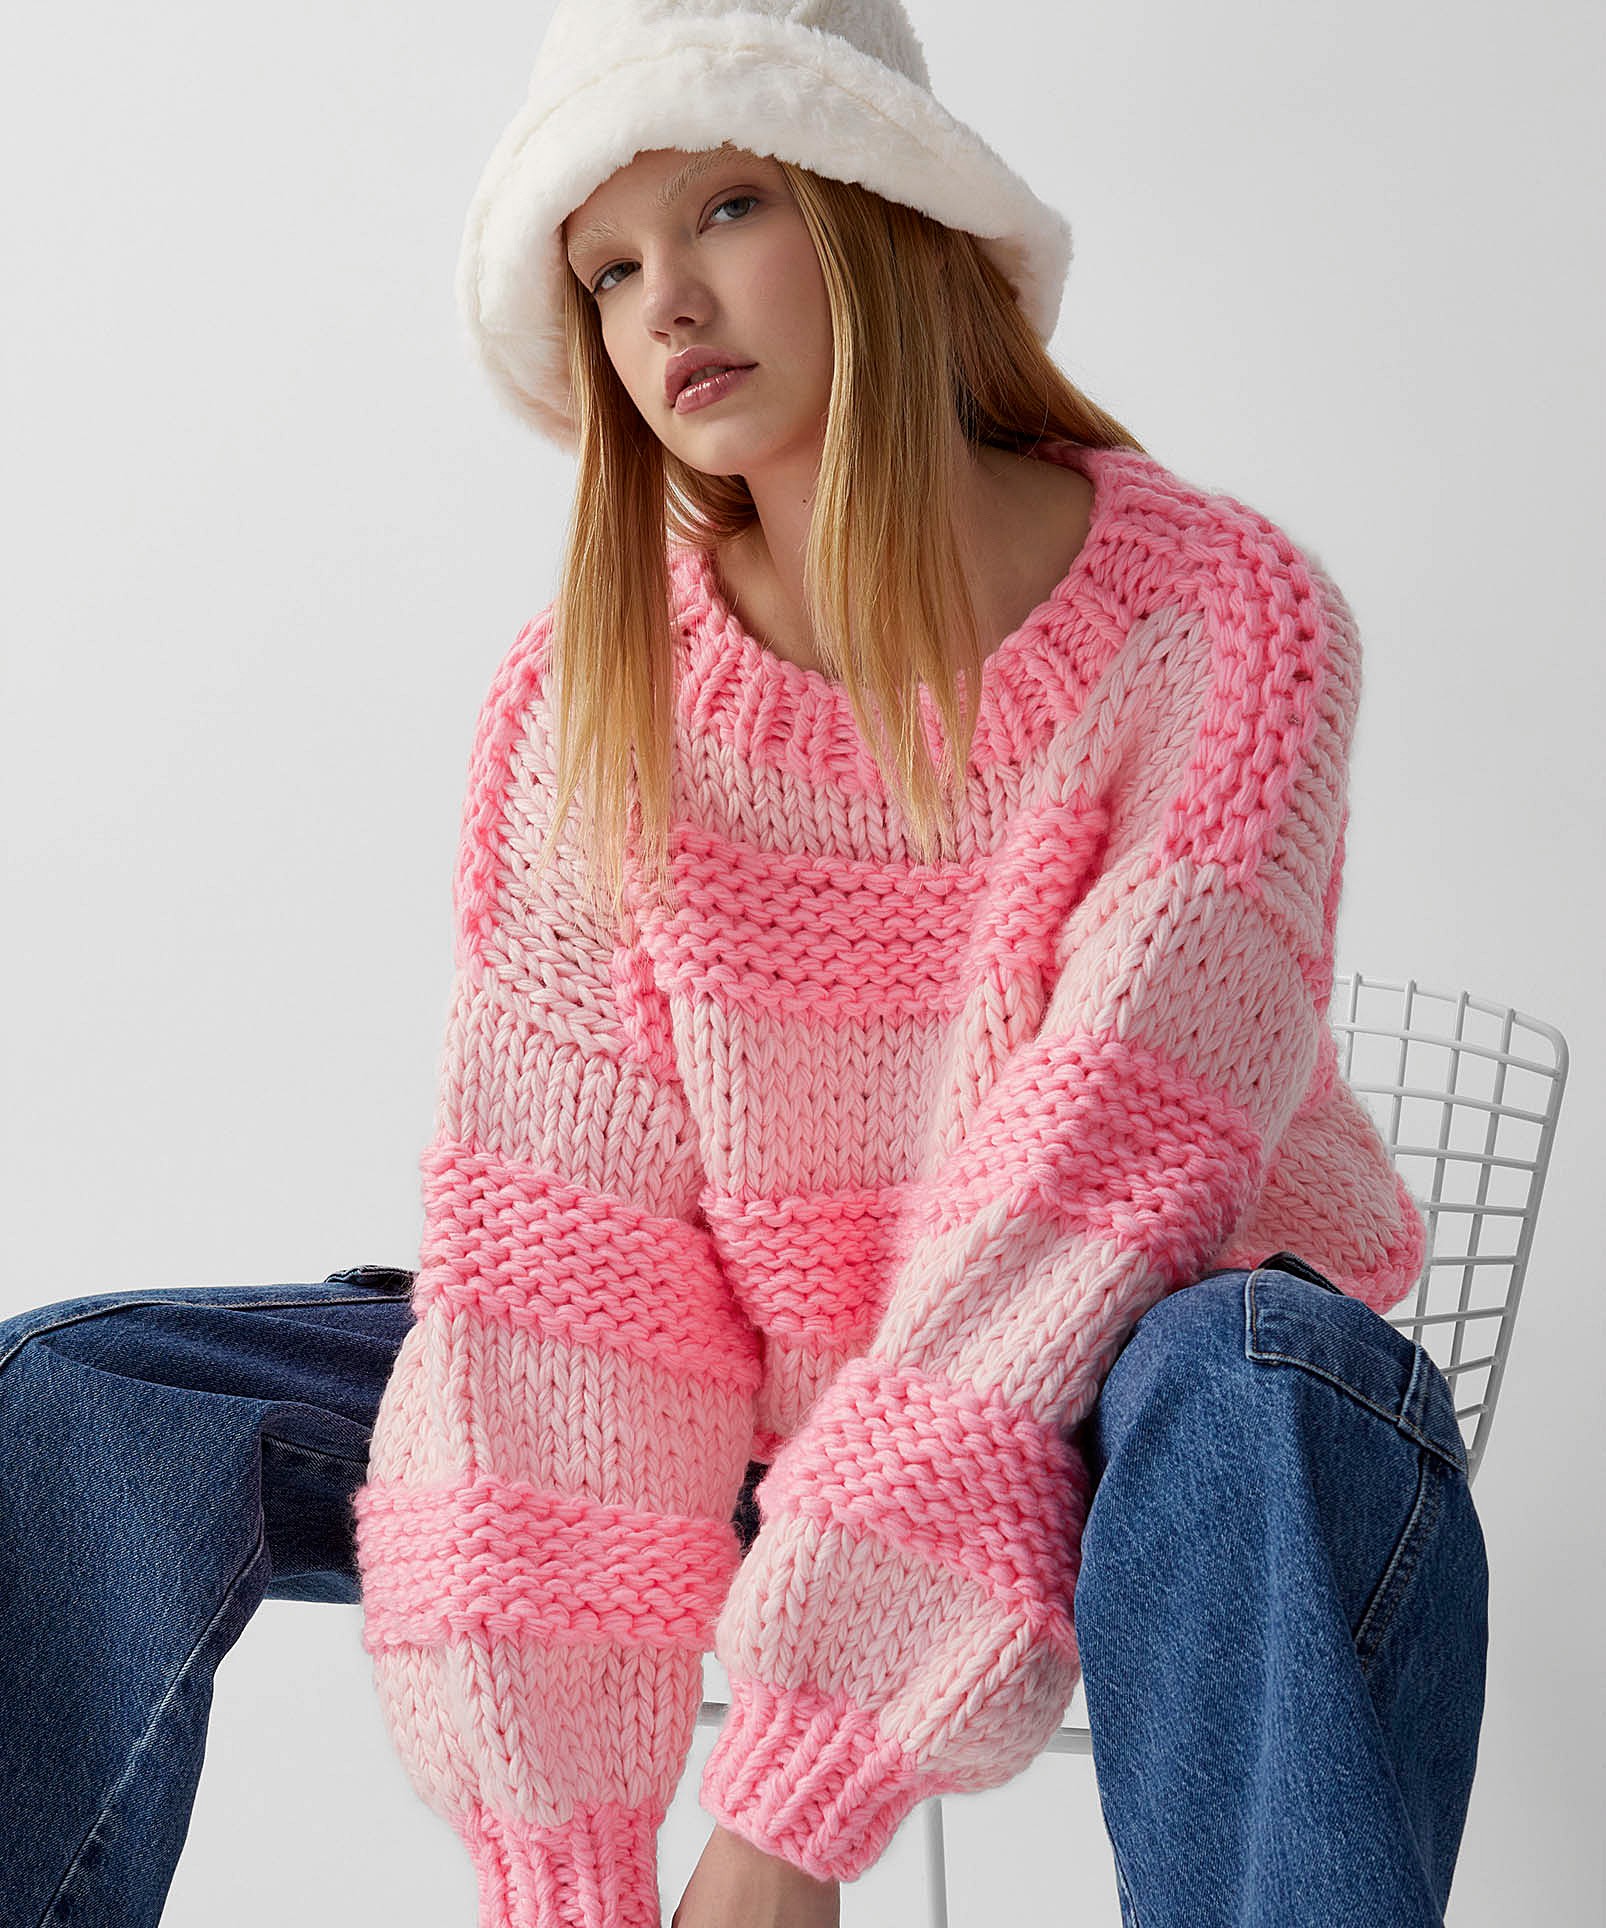 Image of a model sitting on a chair wearing a white furry bucket hat, a pink striped knit sweater and a pair of jeans.